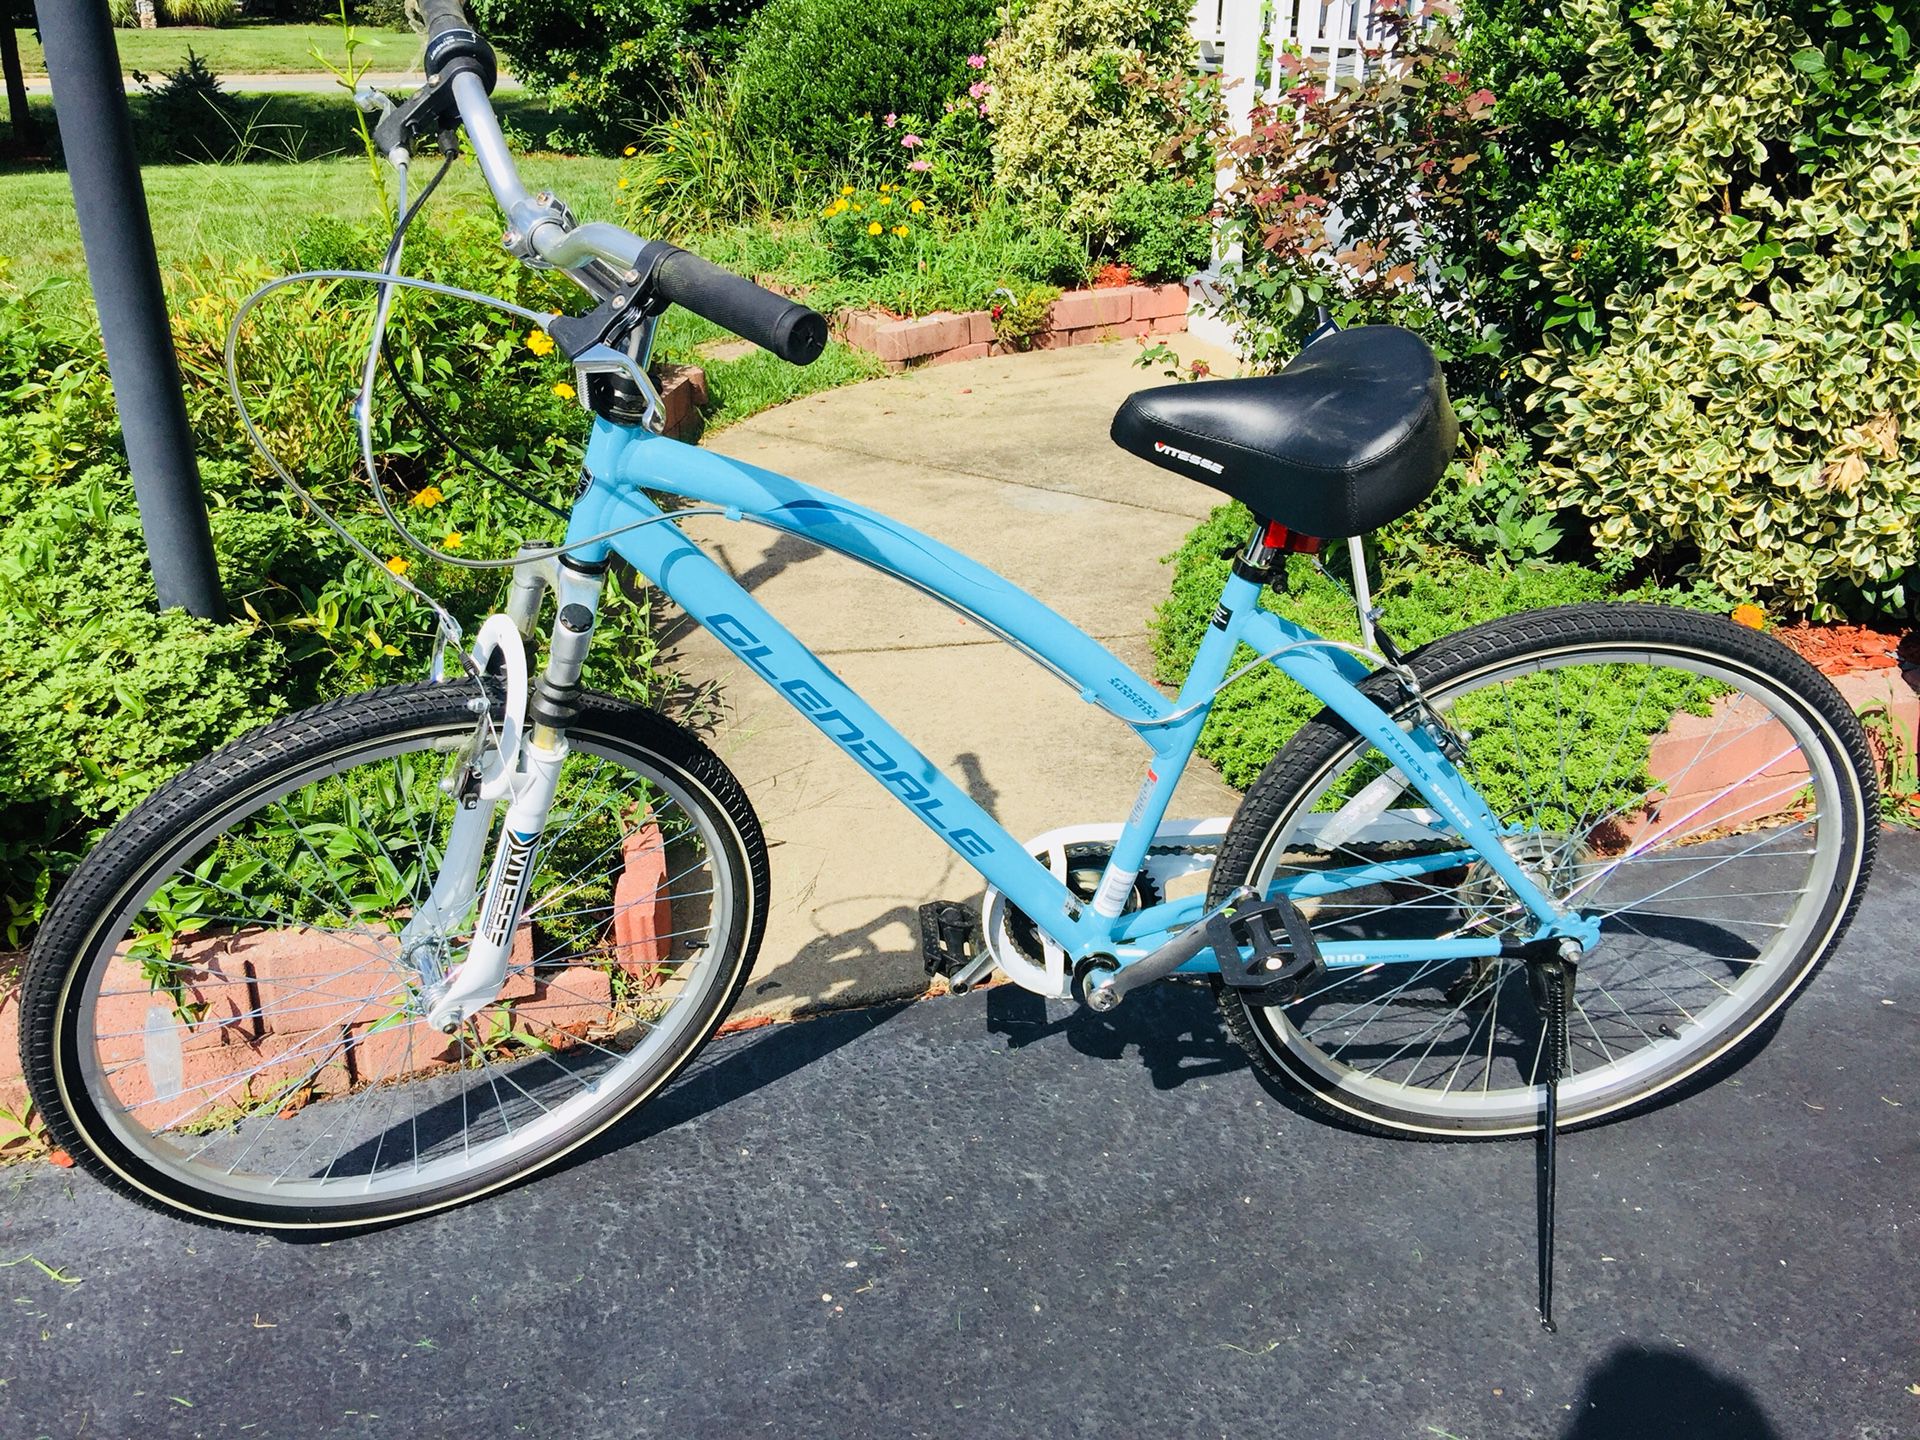 10 speed bike. Used 1 time and daughter wanted a different one.